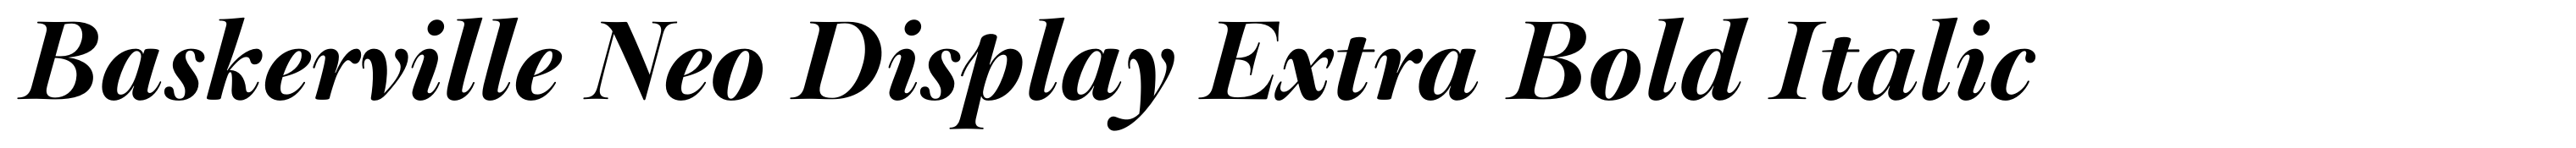 Baskerville Neo Display Extra Bold Italic